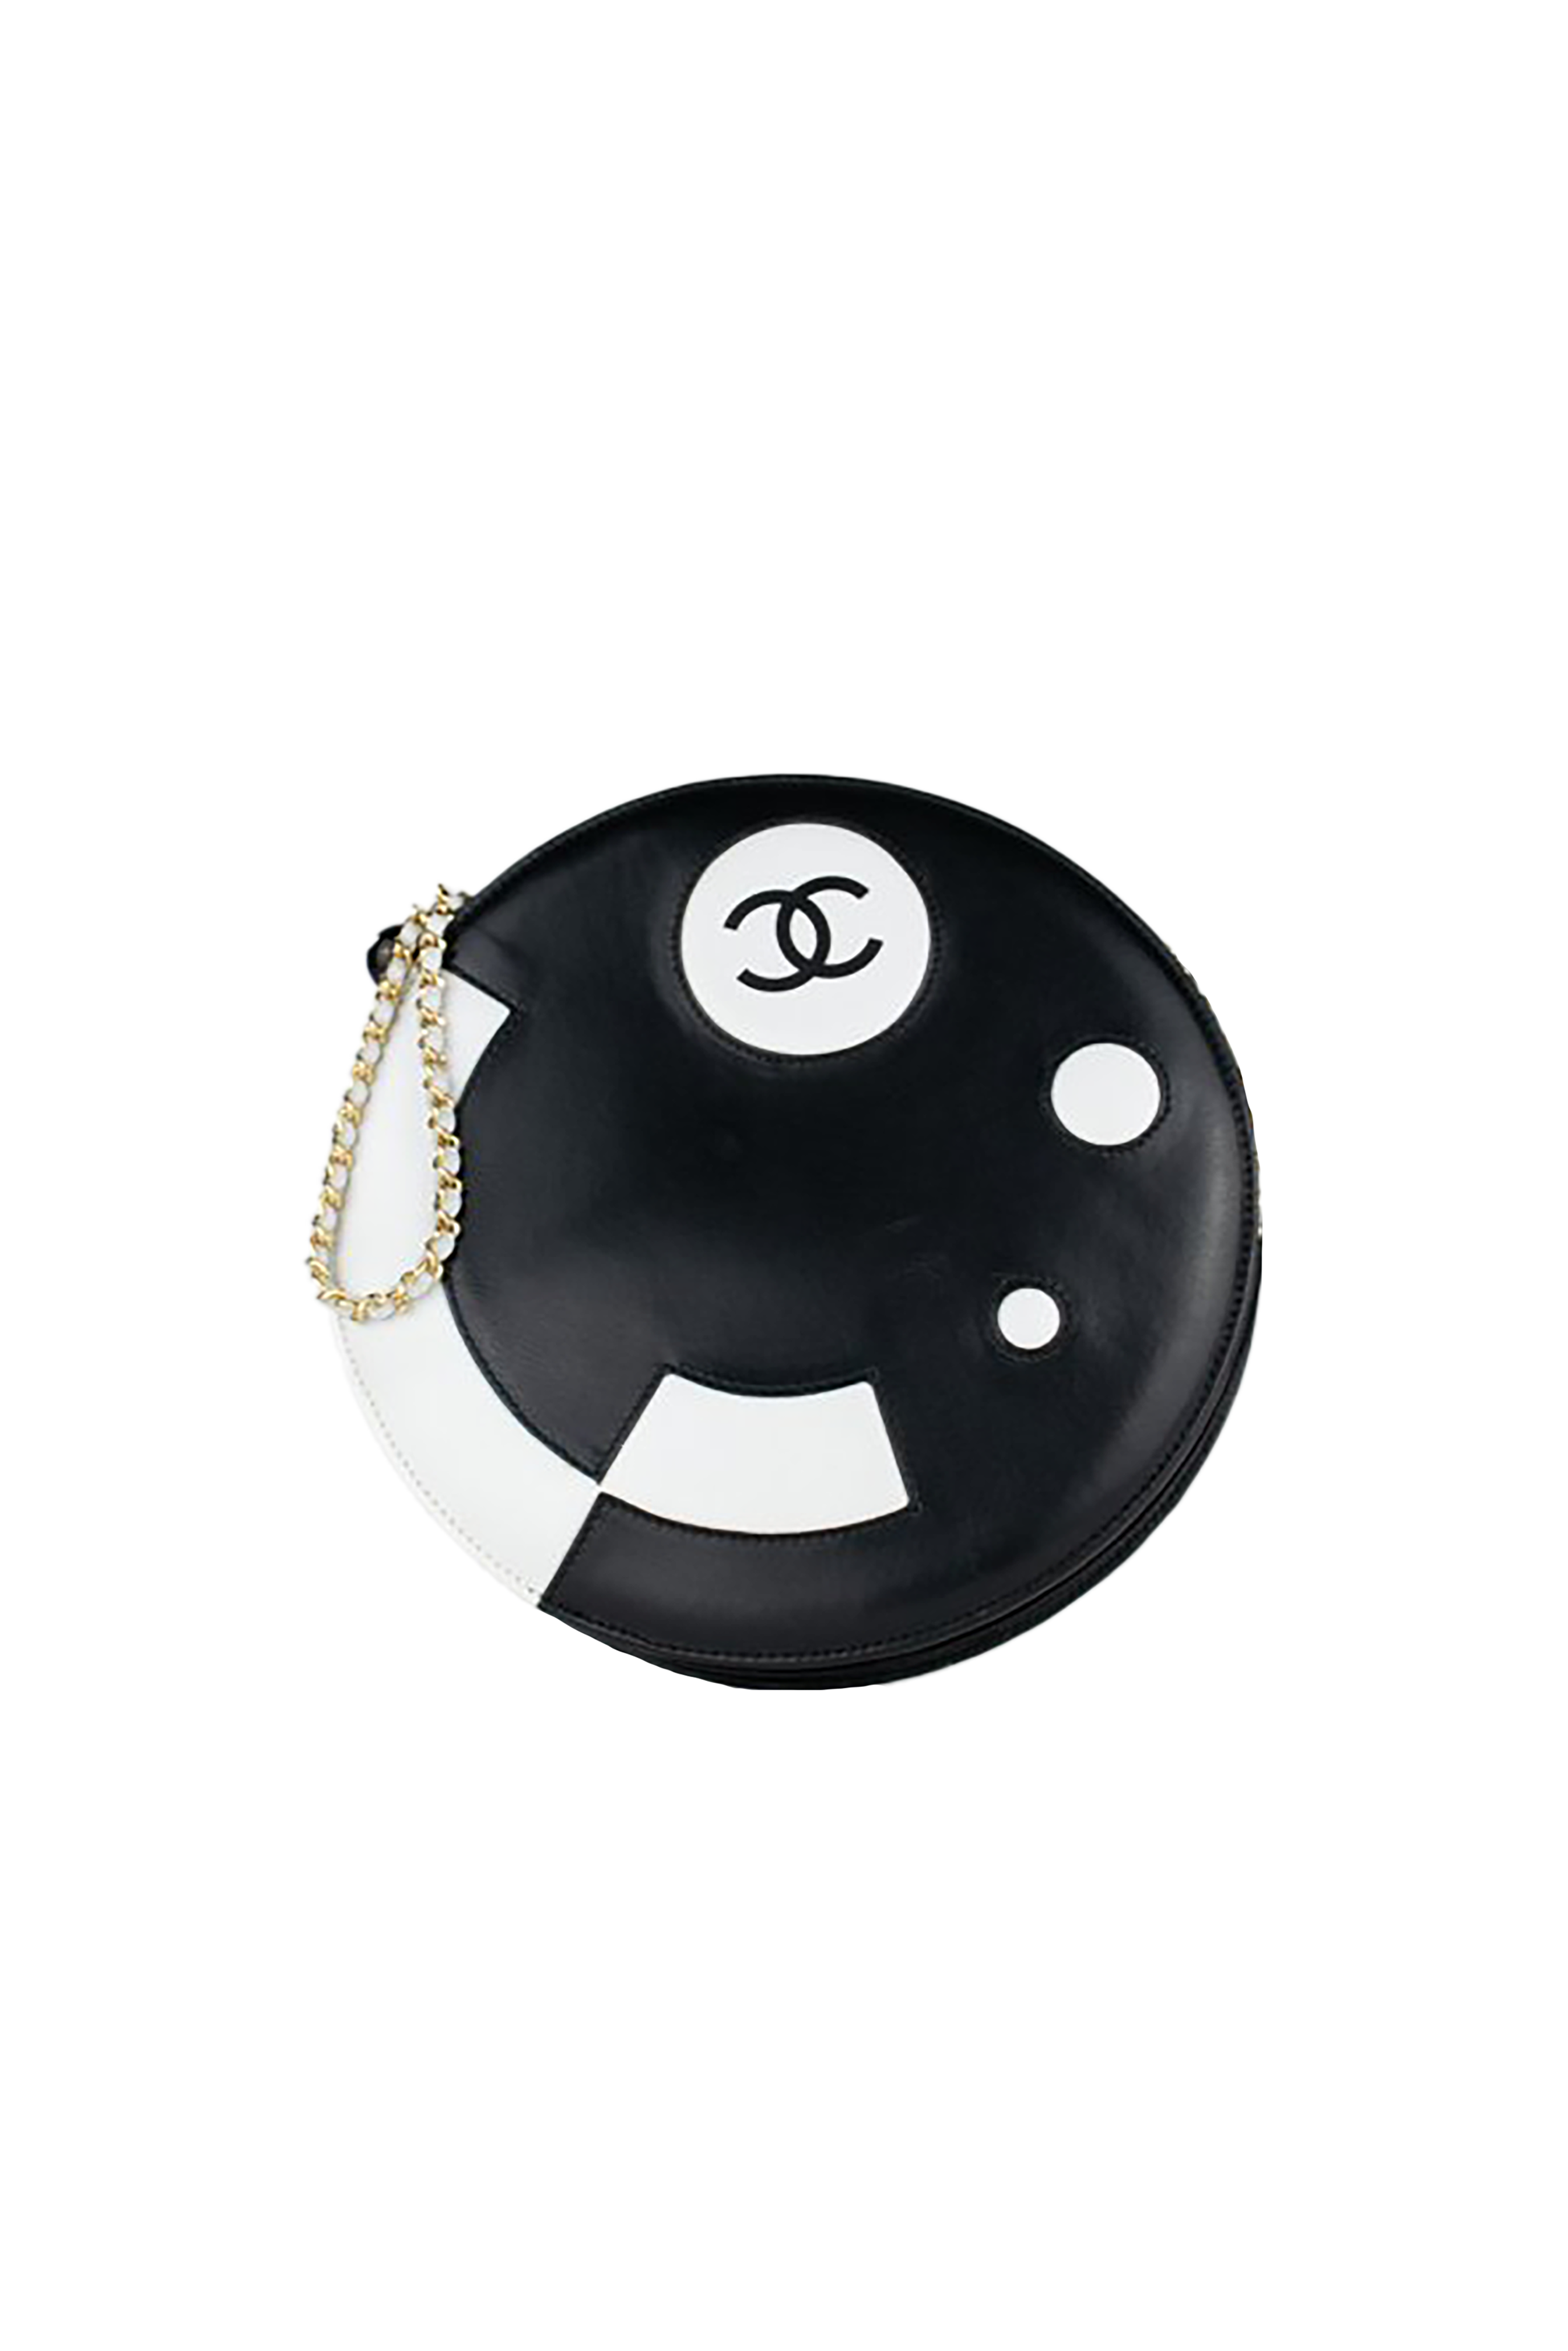 Chanel 2003 Rare Disc Black and White Clutch · INTO